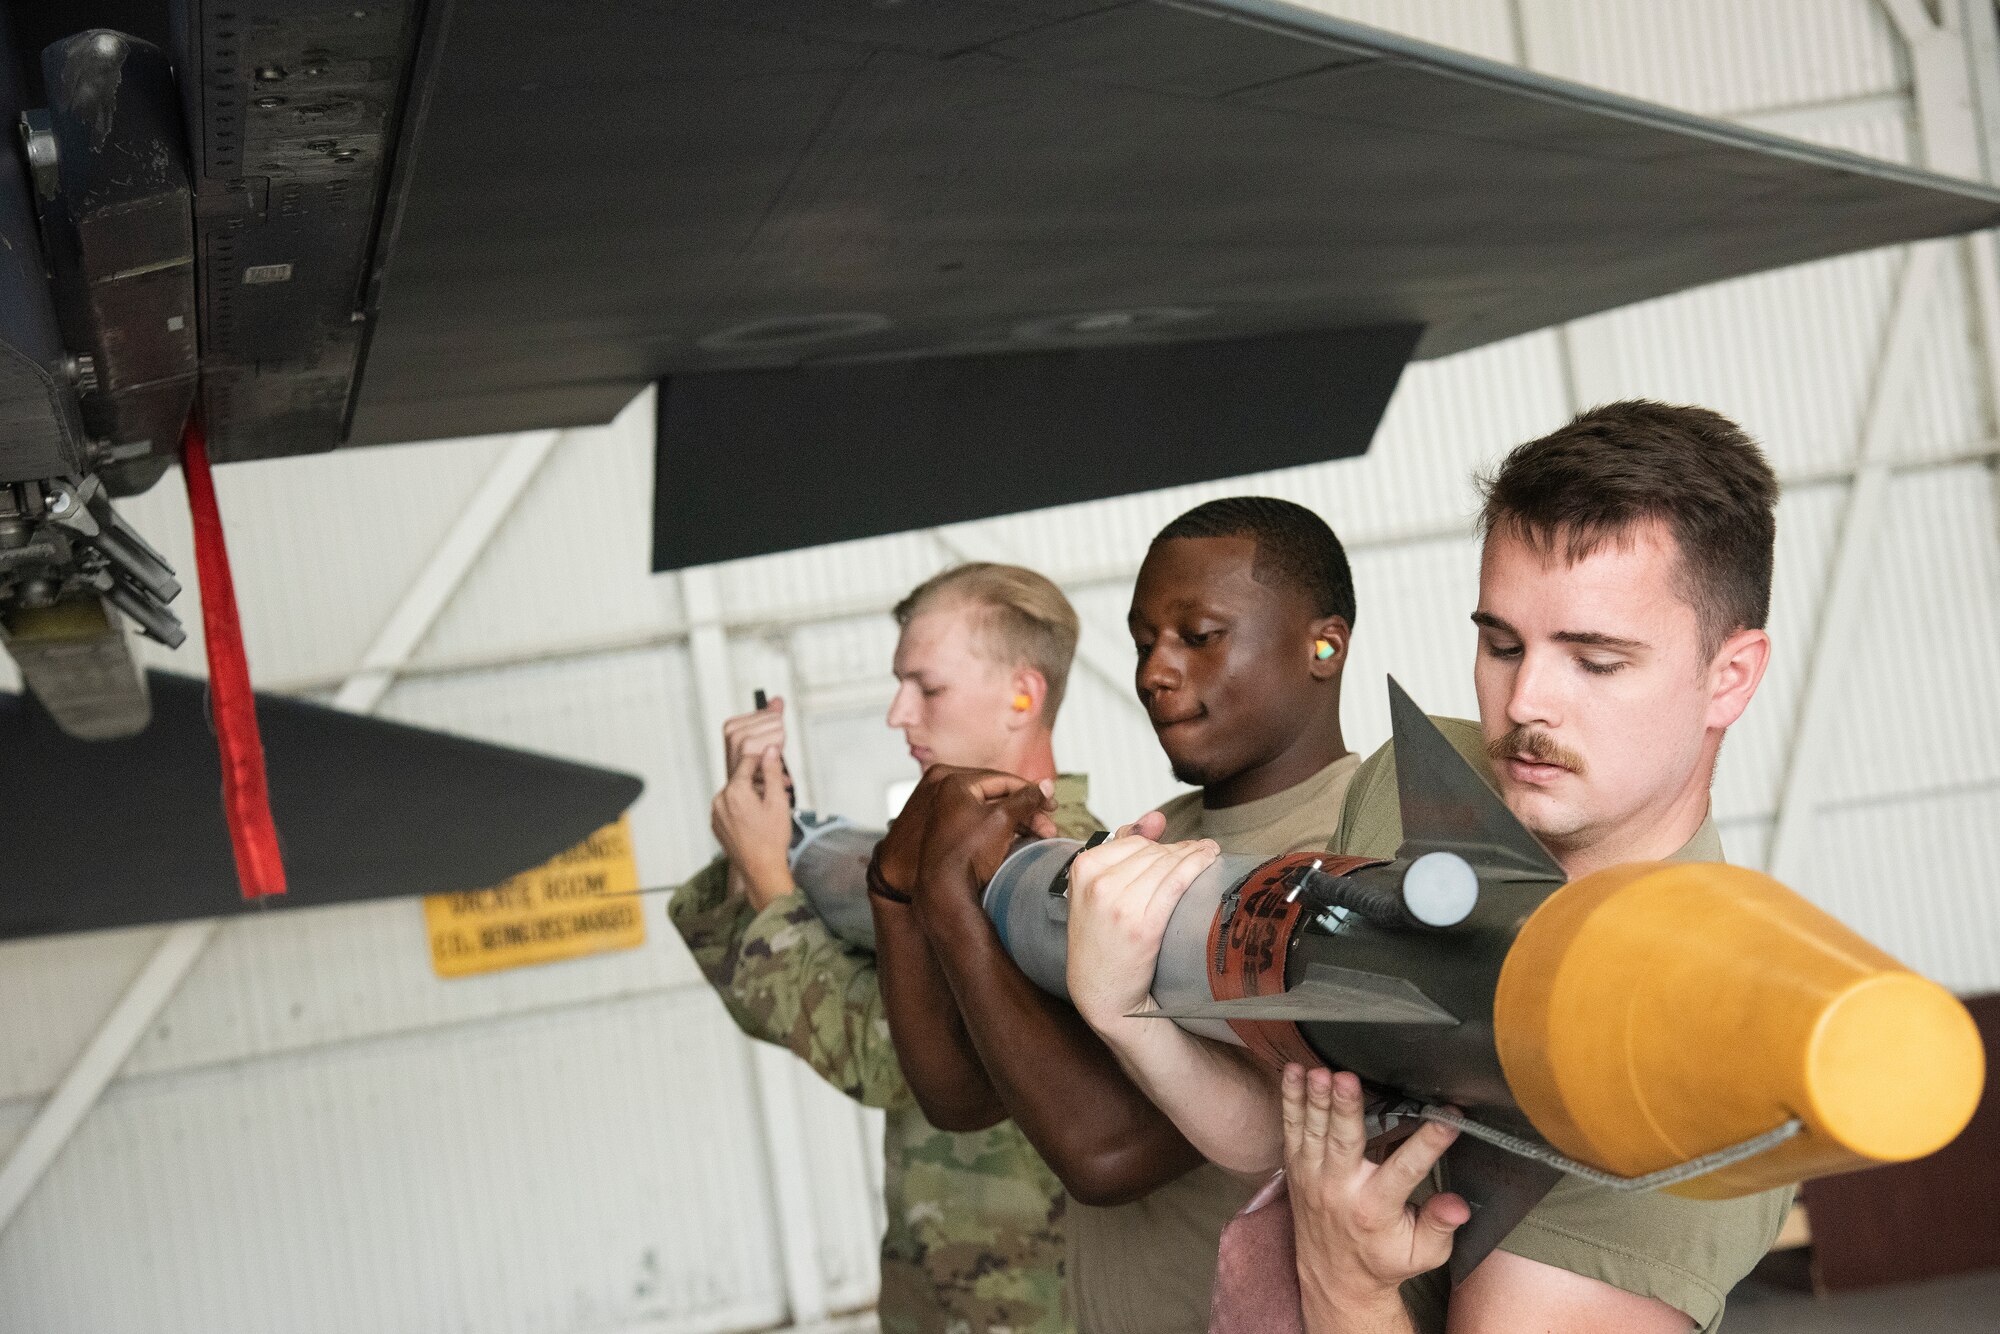 Senior Airman Mitchell Sanborn, right, Staff Sgt. Jashuann Jasper, center, and Airman 1st Class Isaac Bergfield, left, 335th Fighter Generation Squadron weapons load crew members, load unarmed practice [AIM-9X Sidewinder missile] munitions onto an F-15E Strike Eagle.